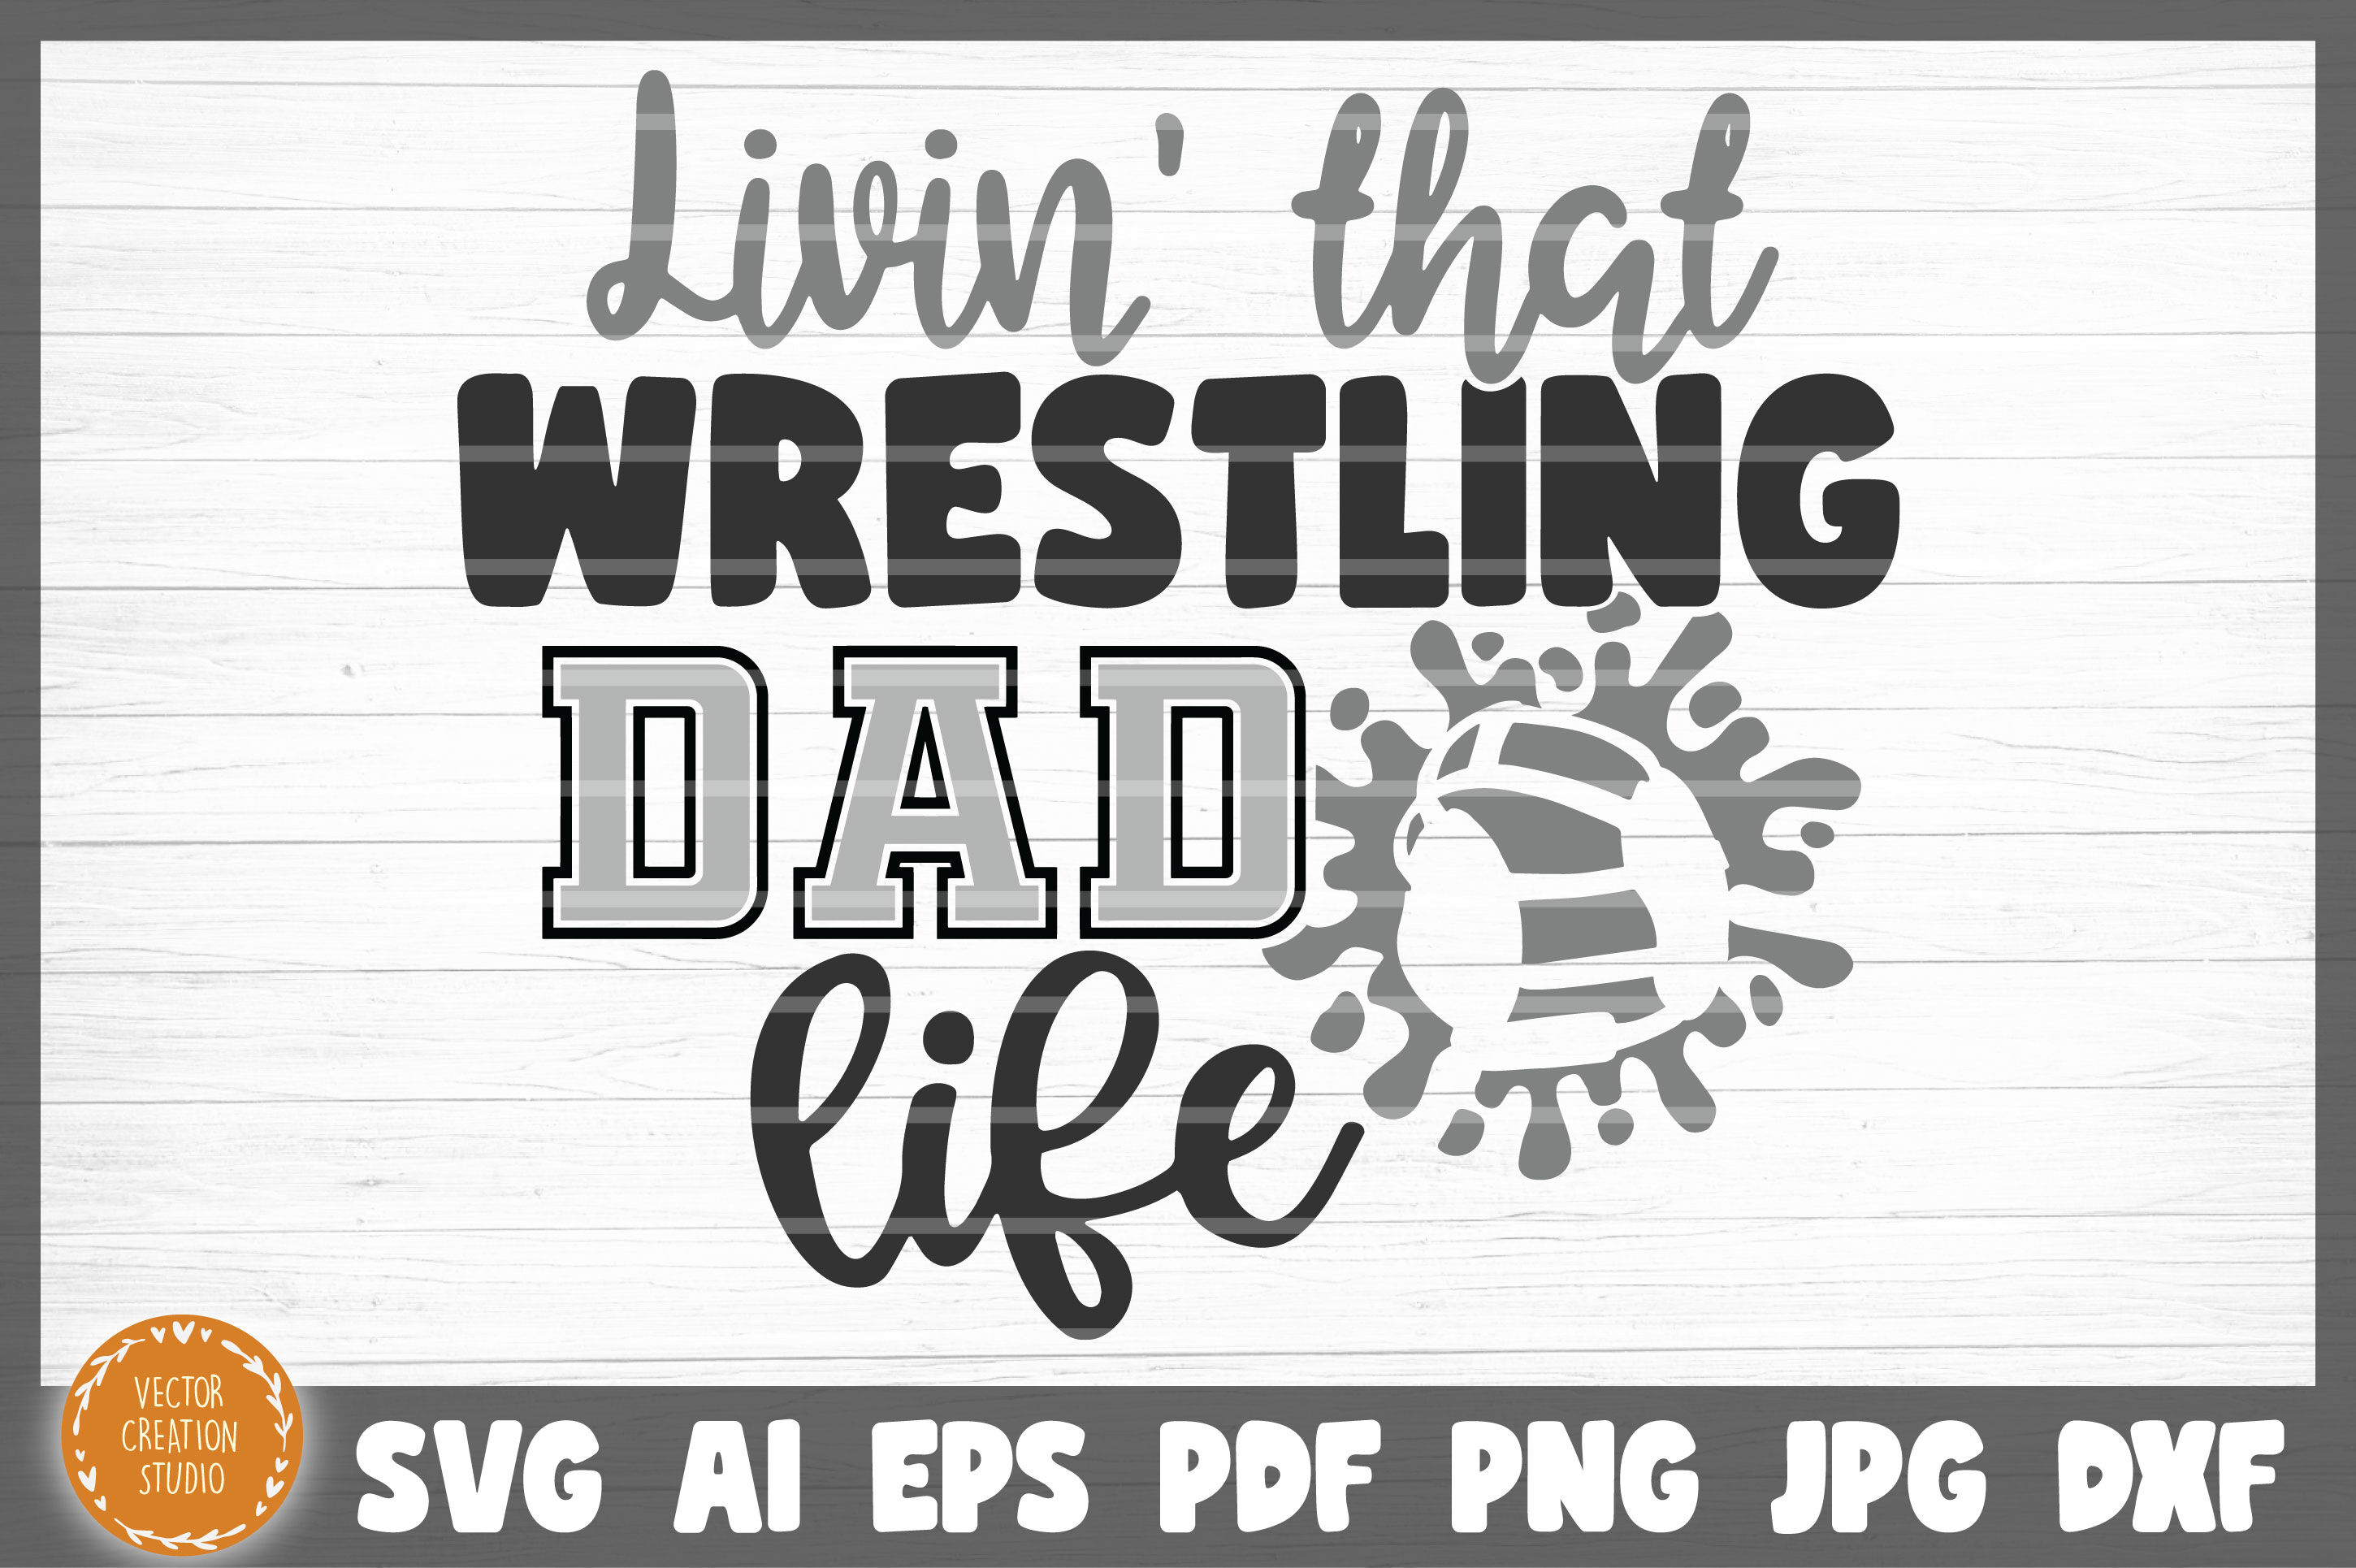 Living That Wrestling Dad Life SVG Cut File By VectorCreationStudio